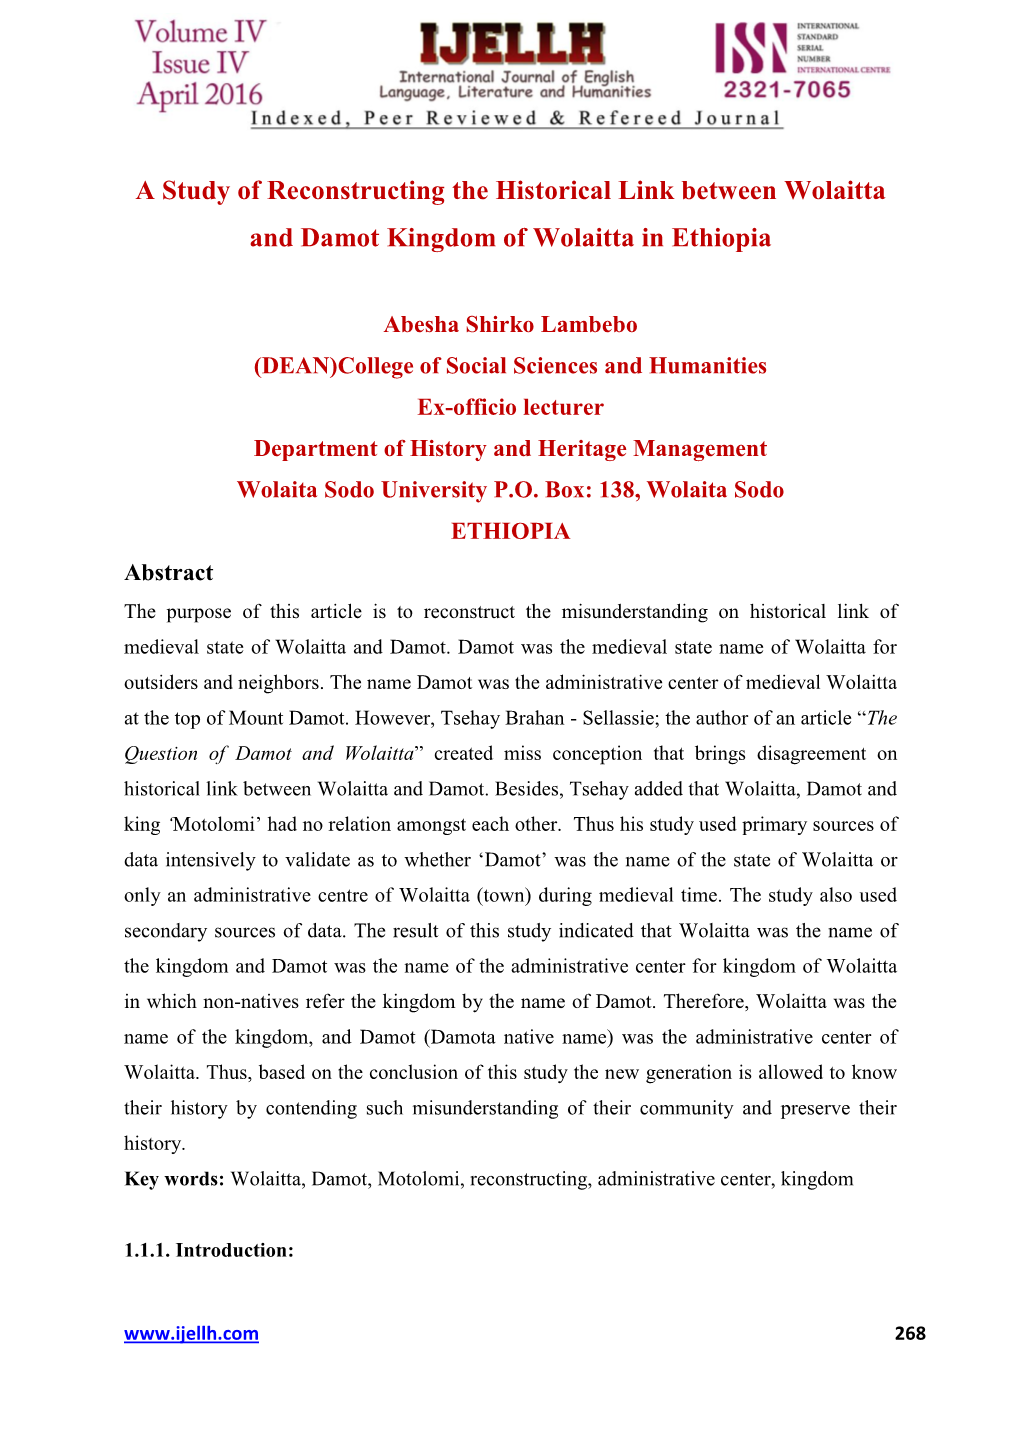 A Study of Reconstructing the Historical Link Between Wolaitta and Damot Kingdom of Wolaitta in Ethiopia